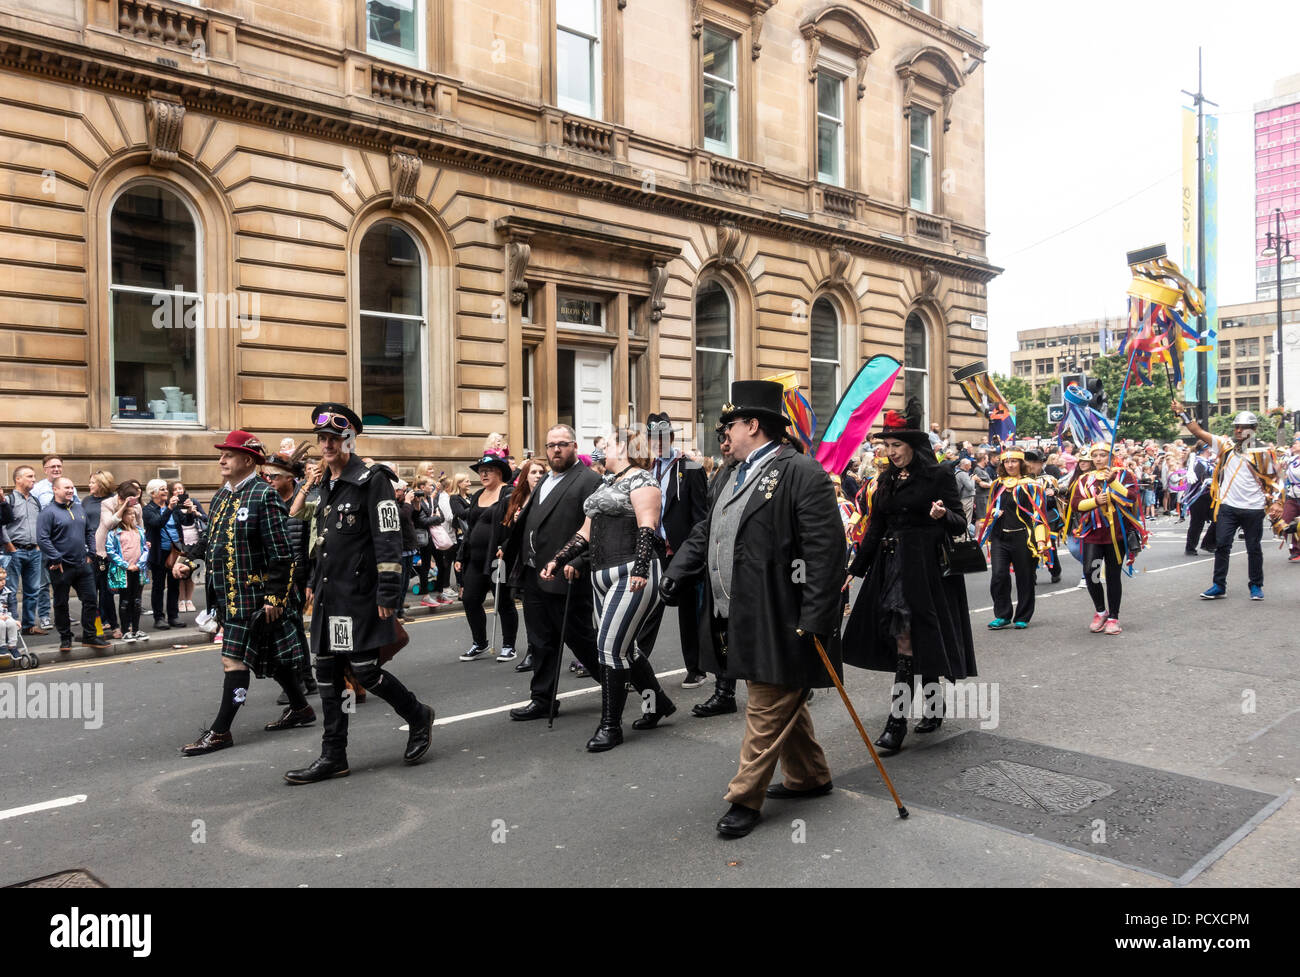 Glasgow, Scotland, UK. 04th August 2018. Adults dressed in Steampunk fashion and children in carvinal clothing, all participants in the Carnival Procession of the Merchant City Festival. The festival is part of Festival 2018 a city-wide cultural event running in parallel with Glasgow 2018, the European Championships. Credit: Elizabeth Leyden/Alamy Live News Stock Photo